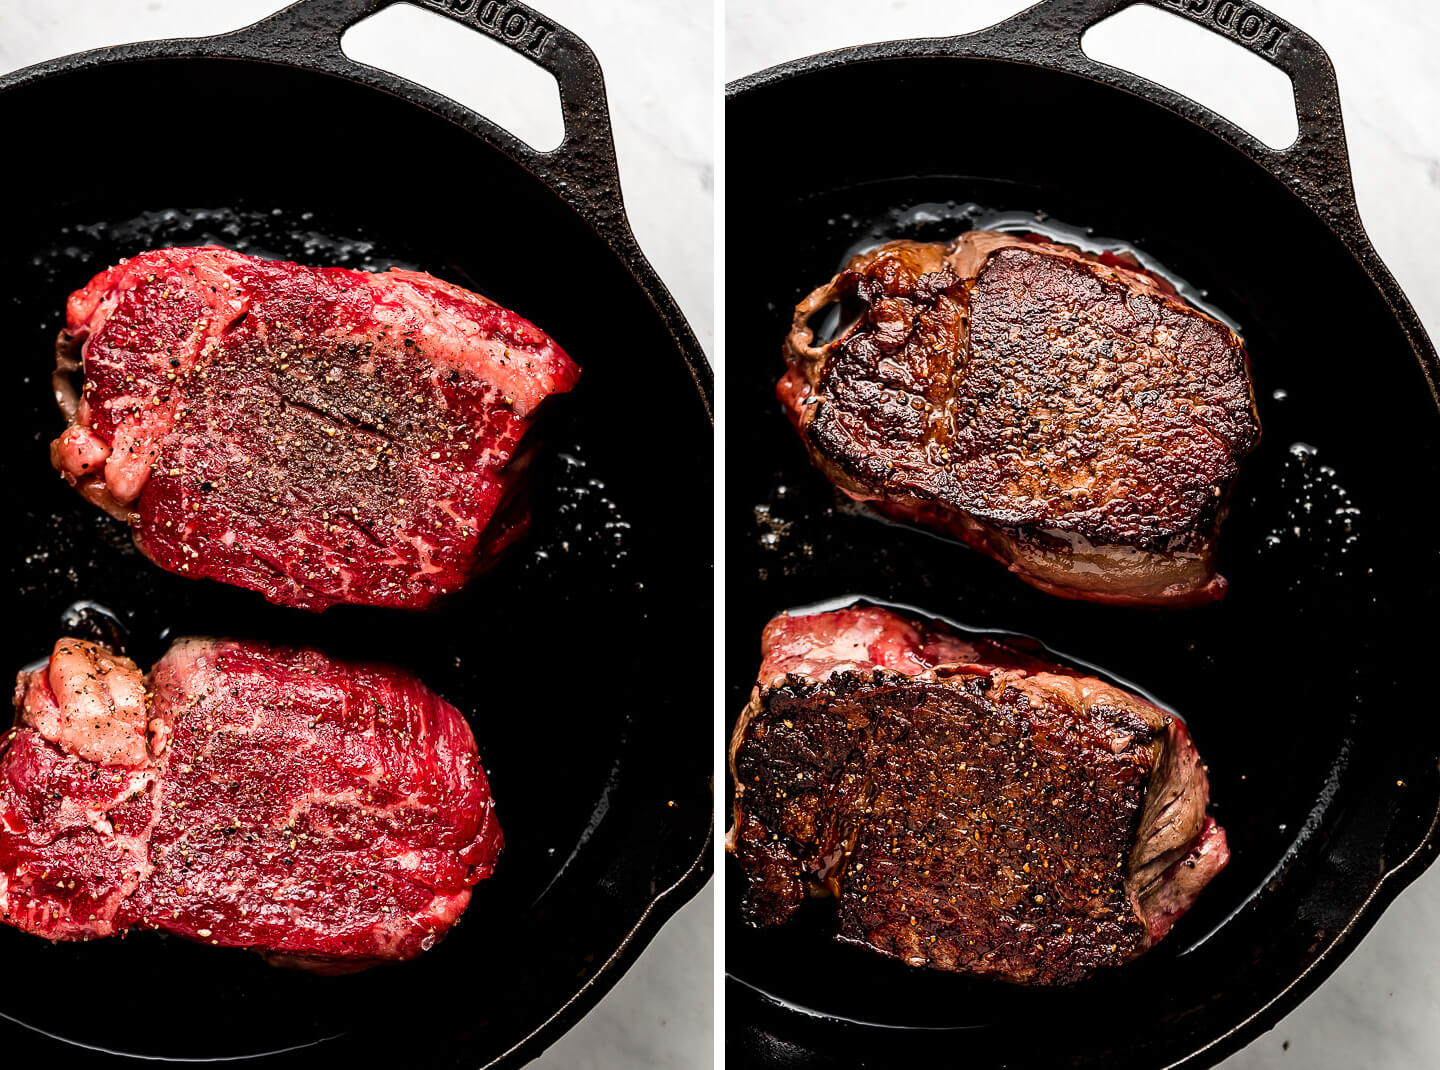 Two beef tenderloin steaks cooking in a cast iron skillet, on side browned.